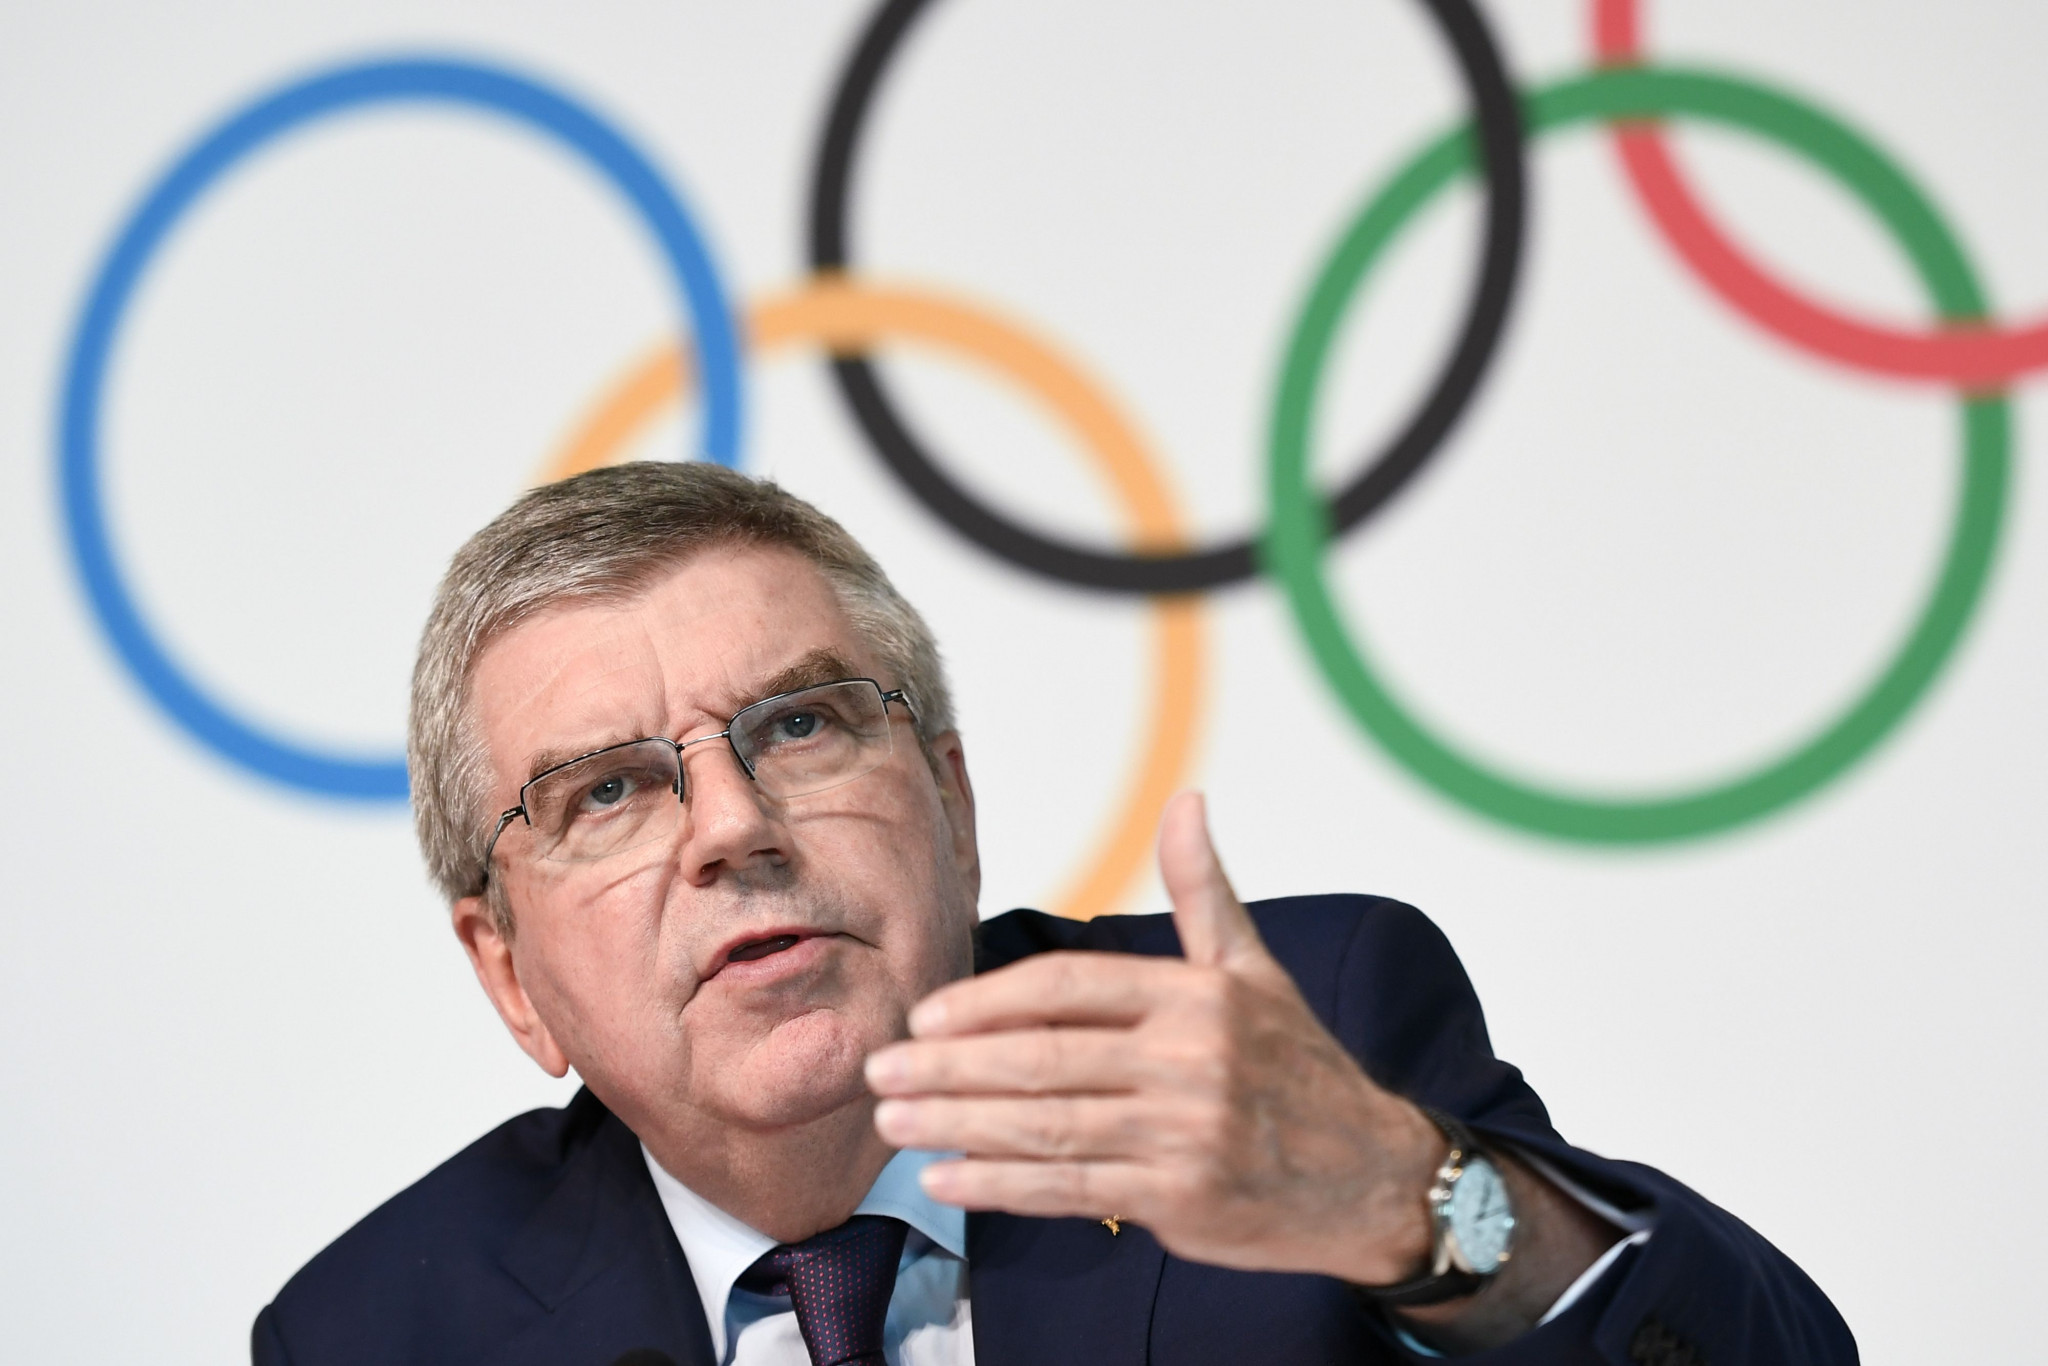 IOC President Thomas Bach in April recommended athletes begin discussions with their NOCs regarding Rule 40 ©Getty Images